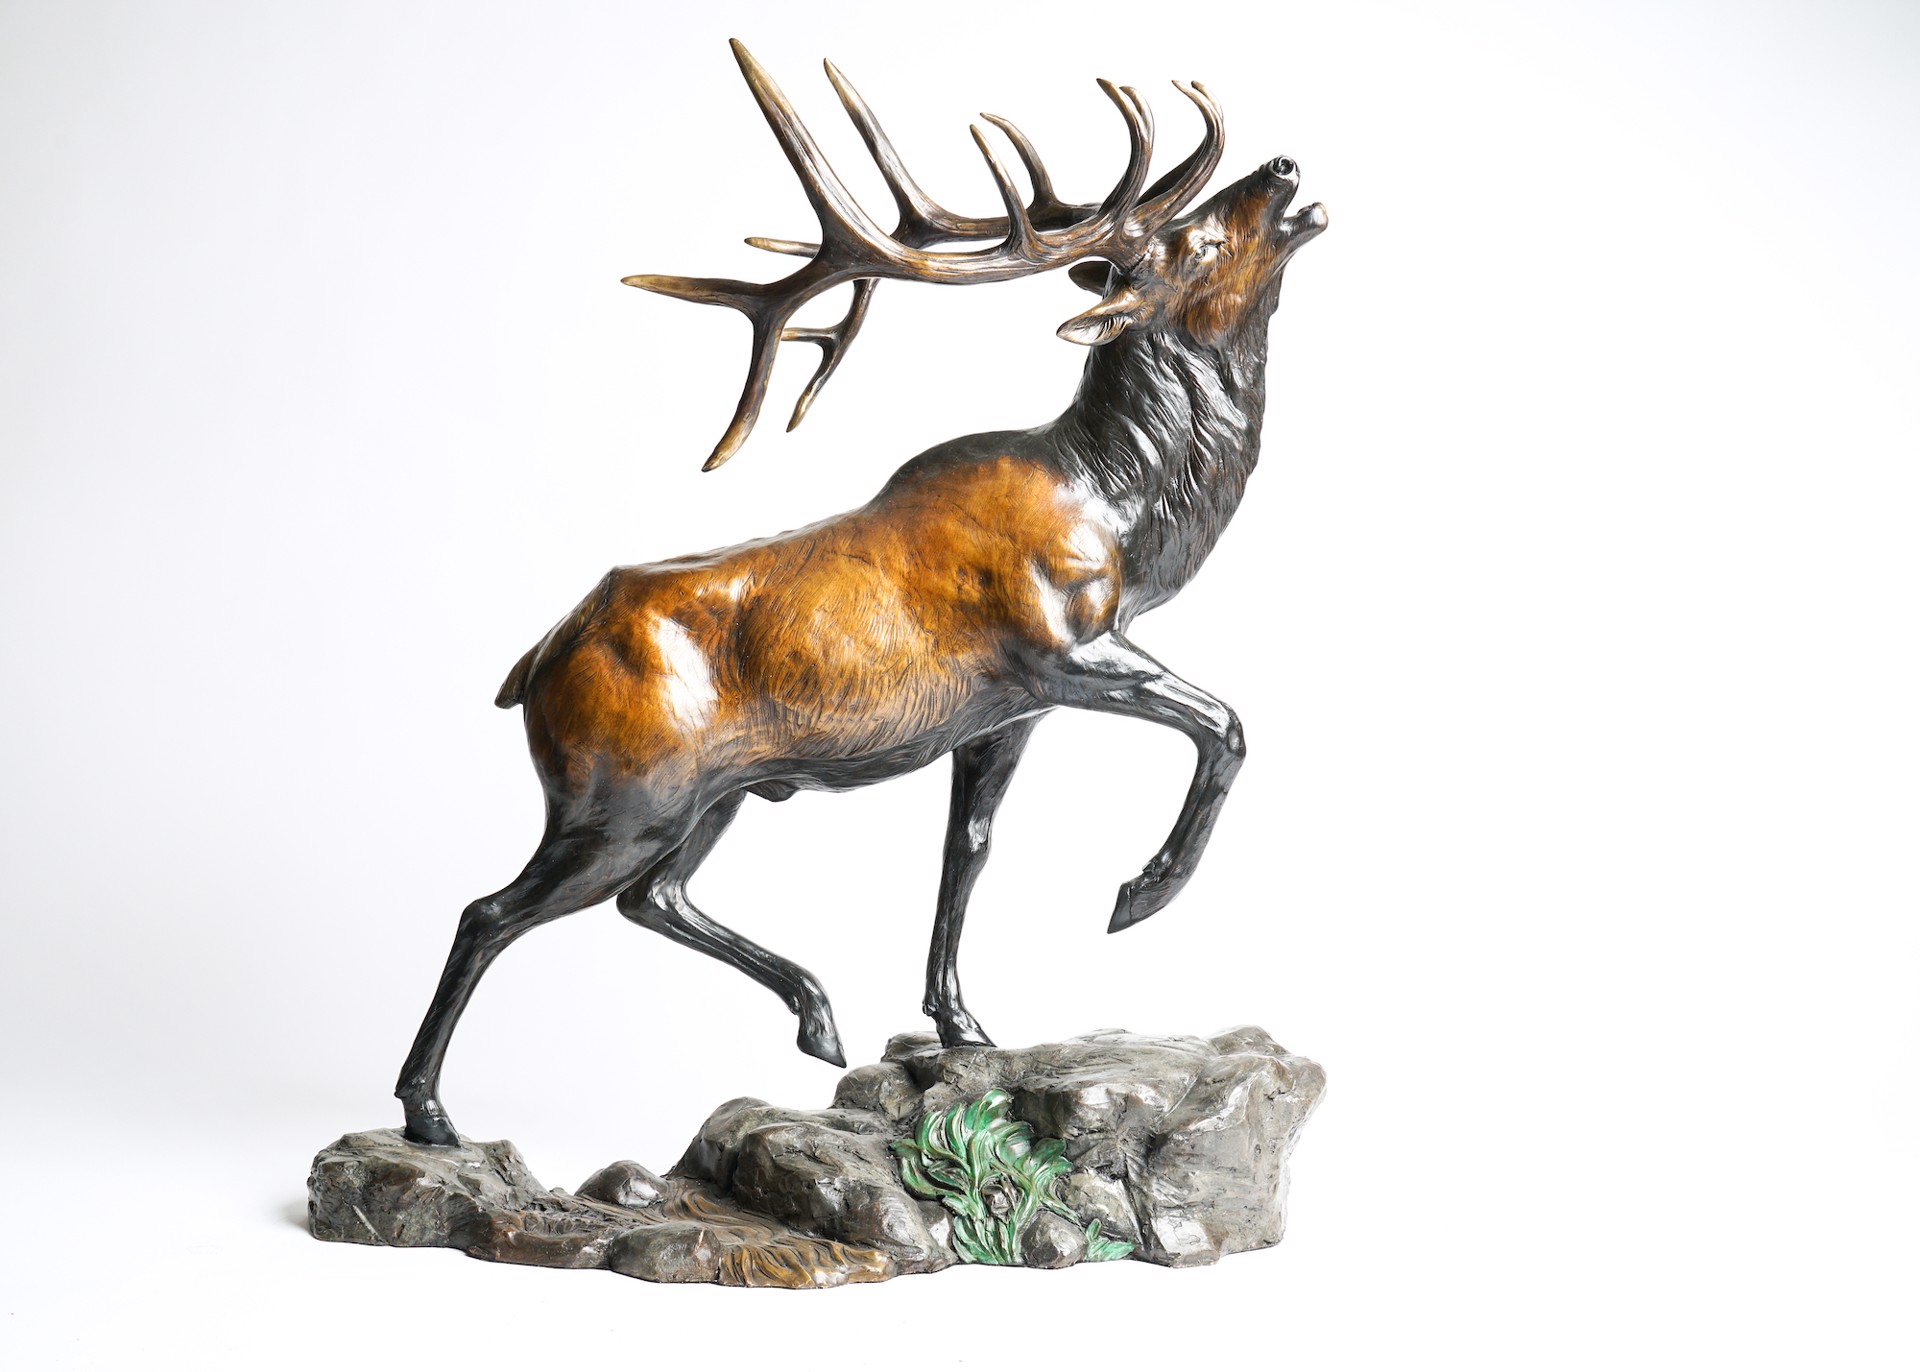 A Bronze Sculpture Of A Bull Elk With Large Antlers Bugling With Head Up Mid Step, By Rip And Alison Caswell